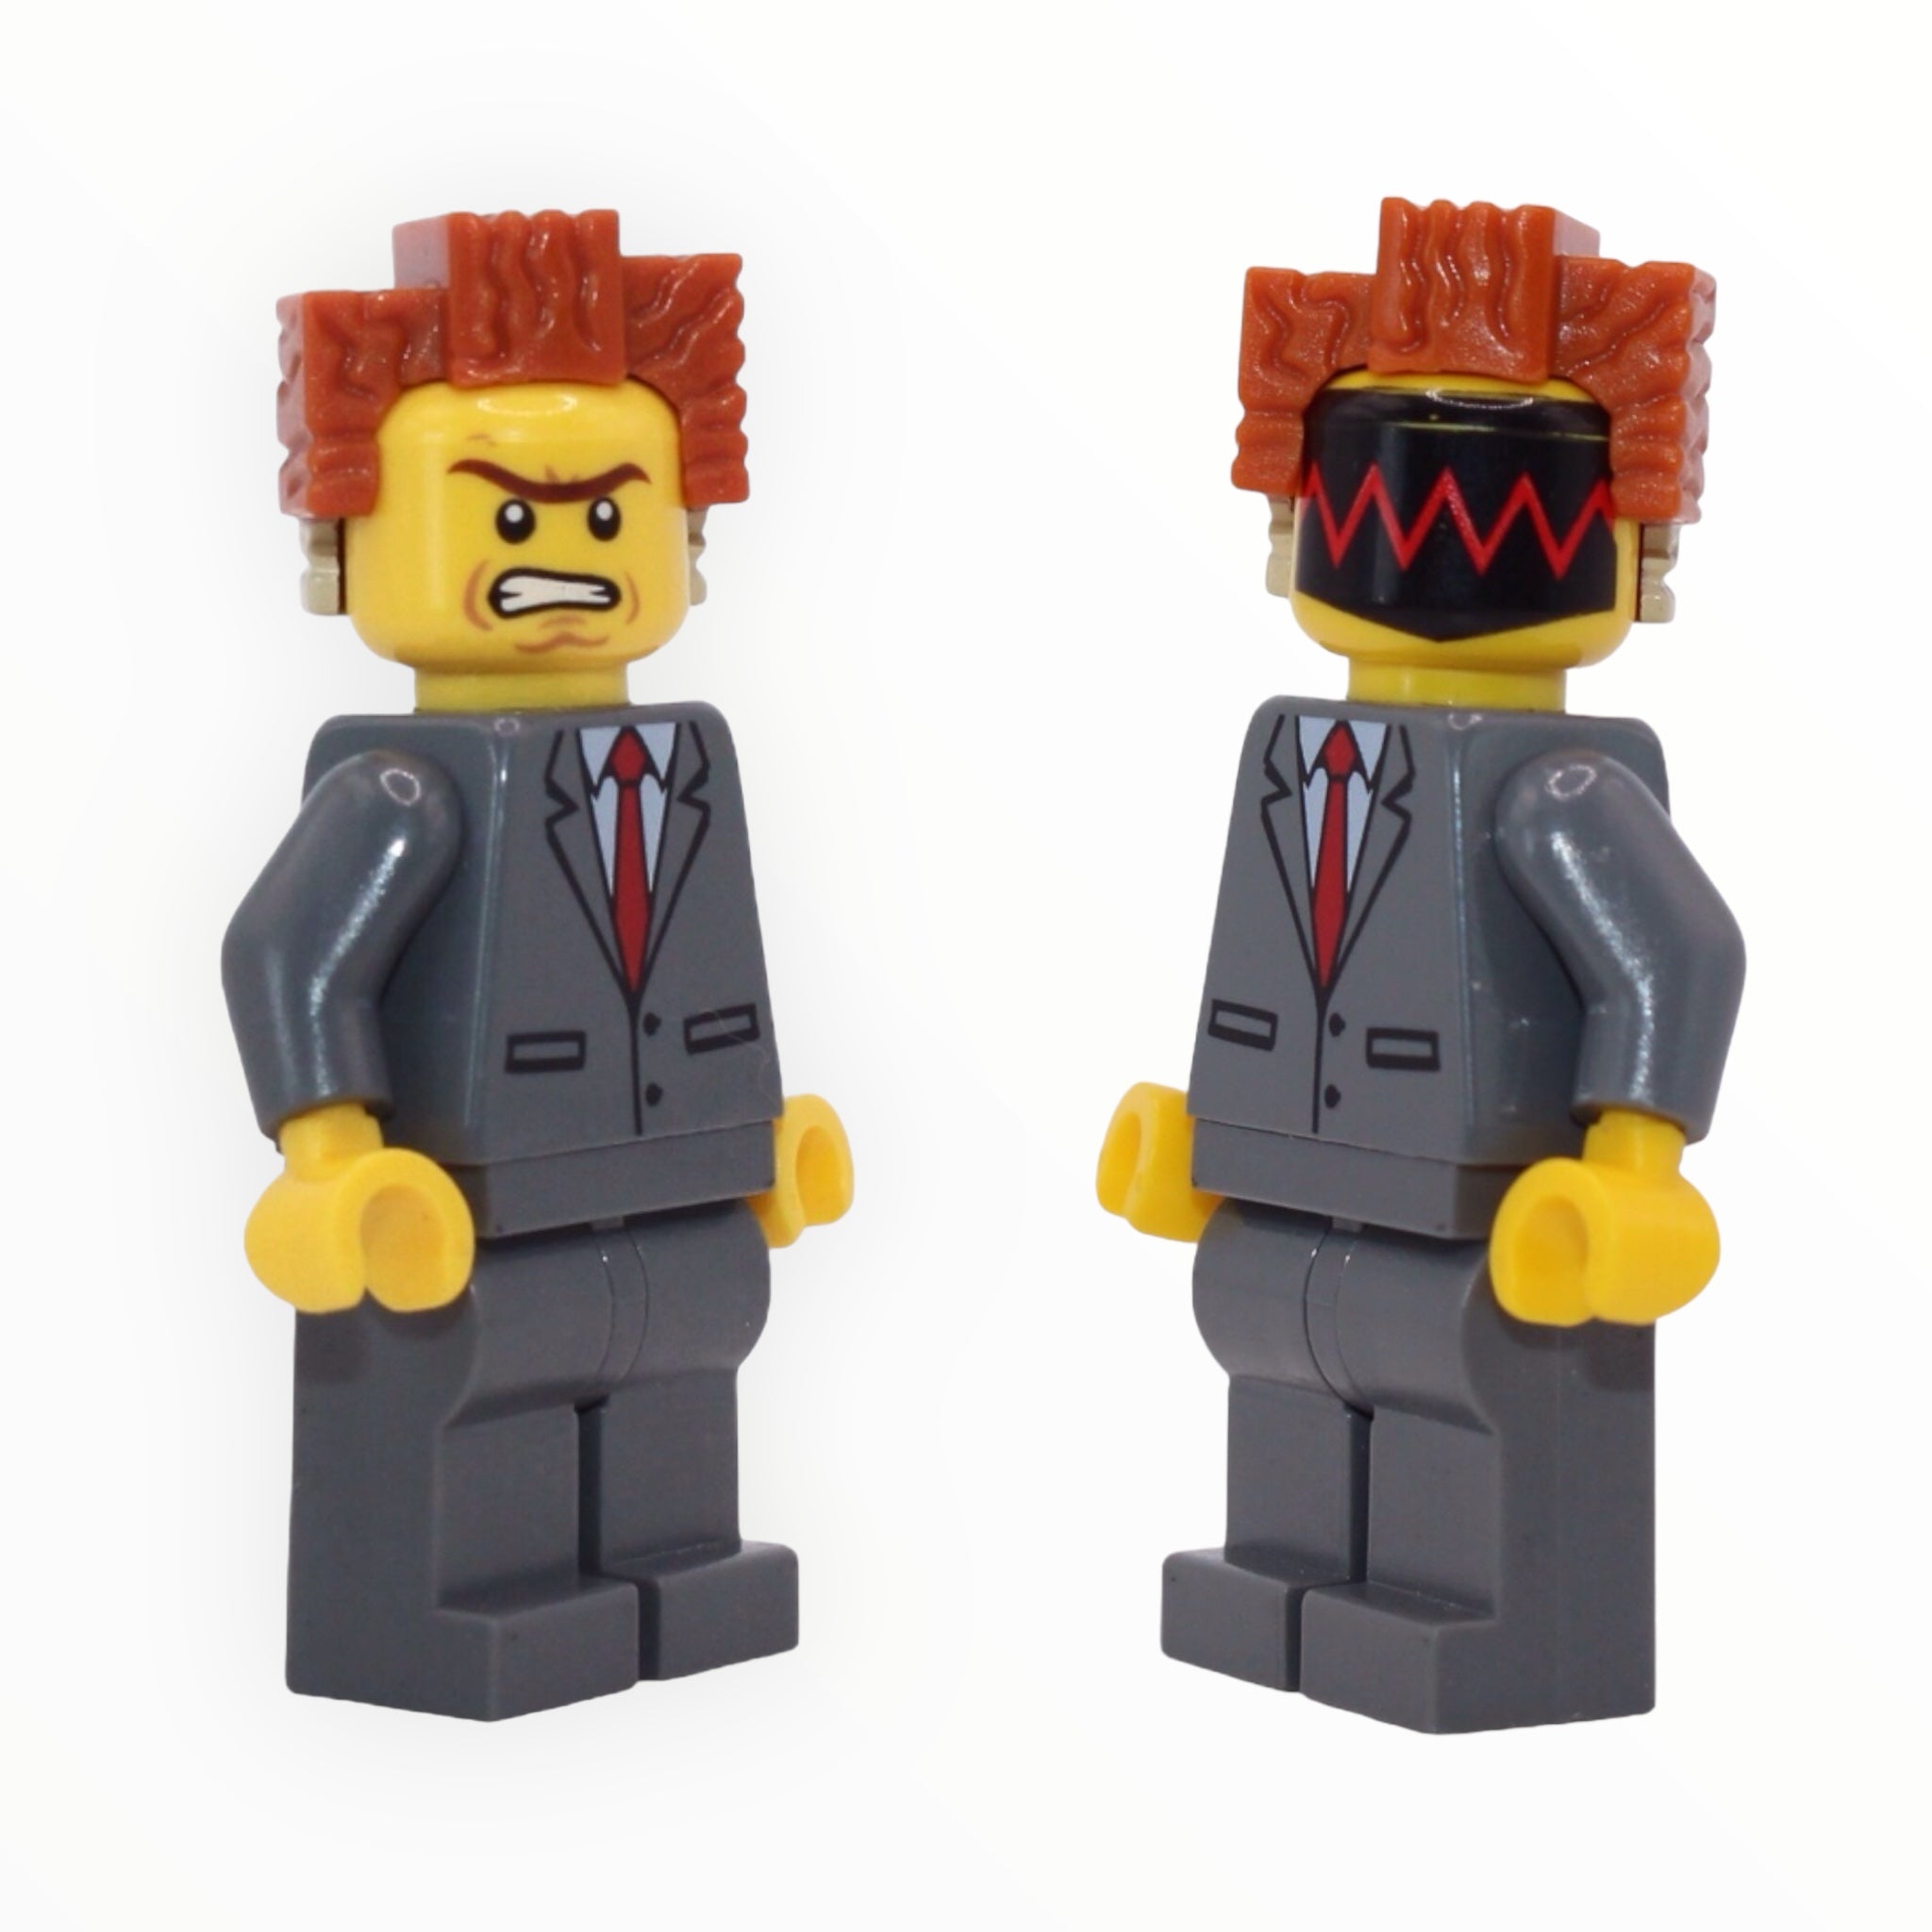 President Business (angry / mask)